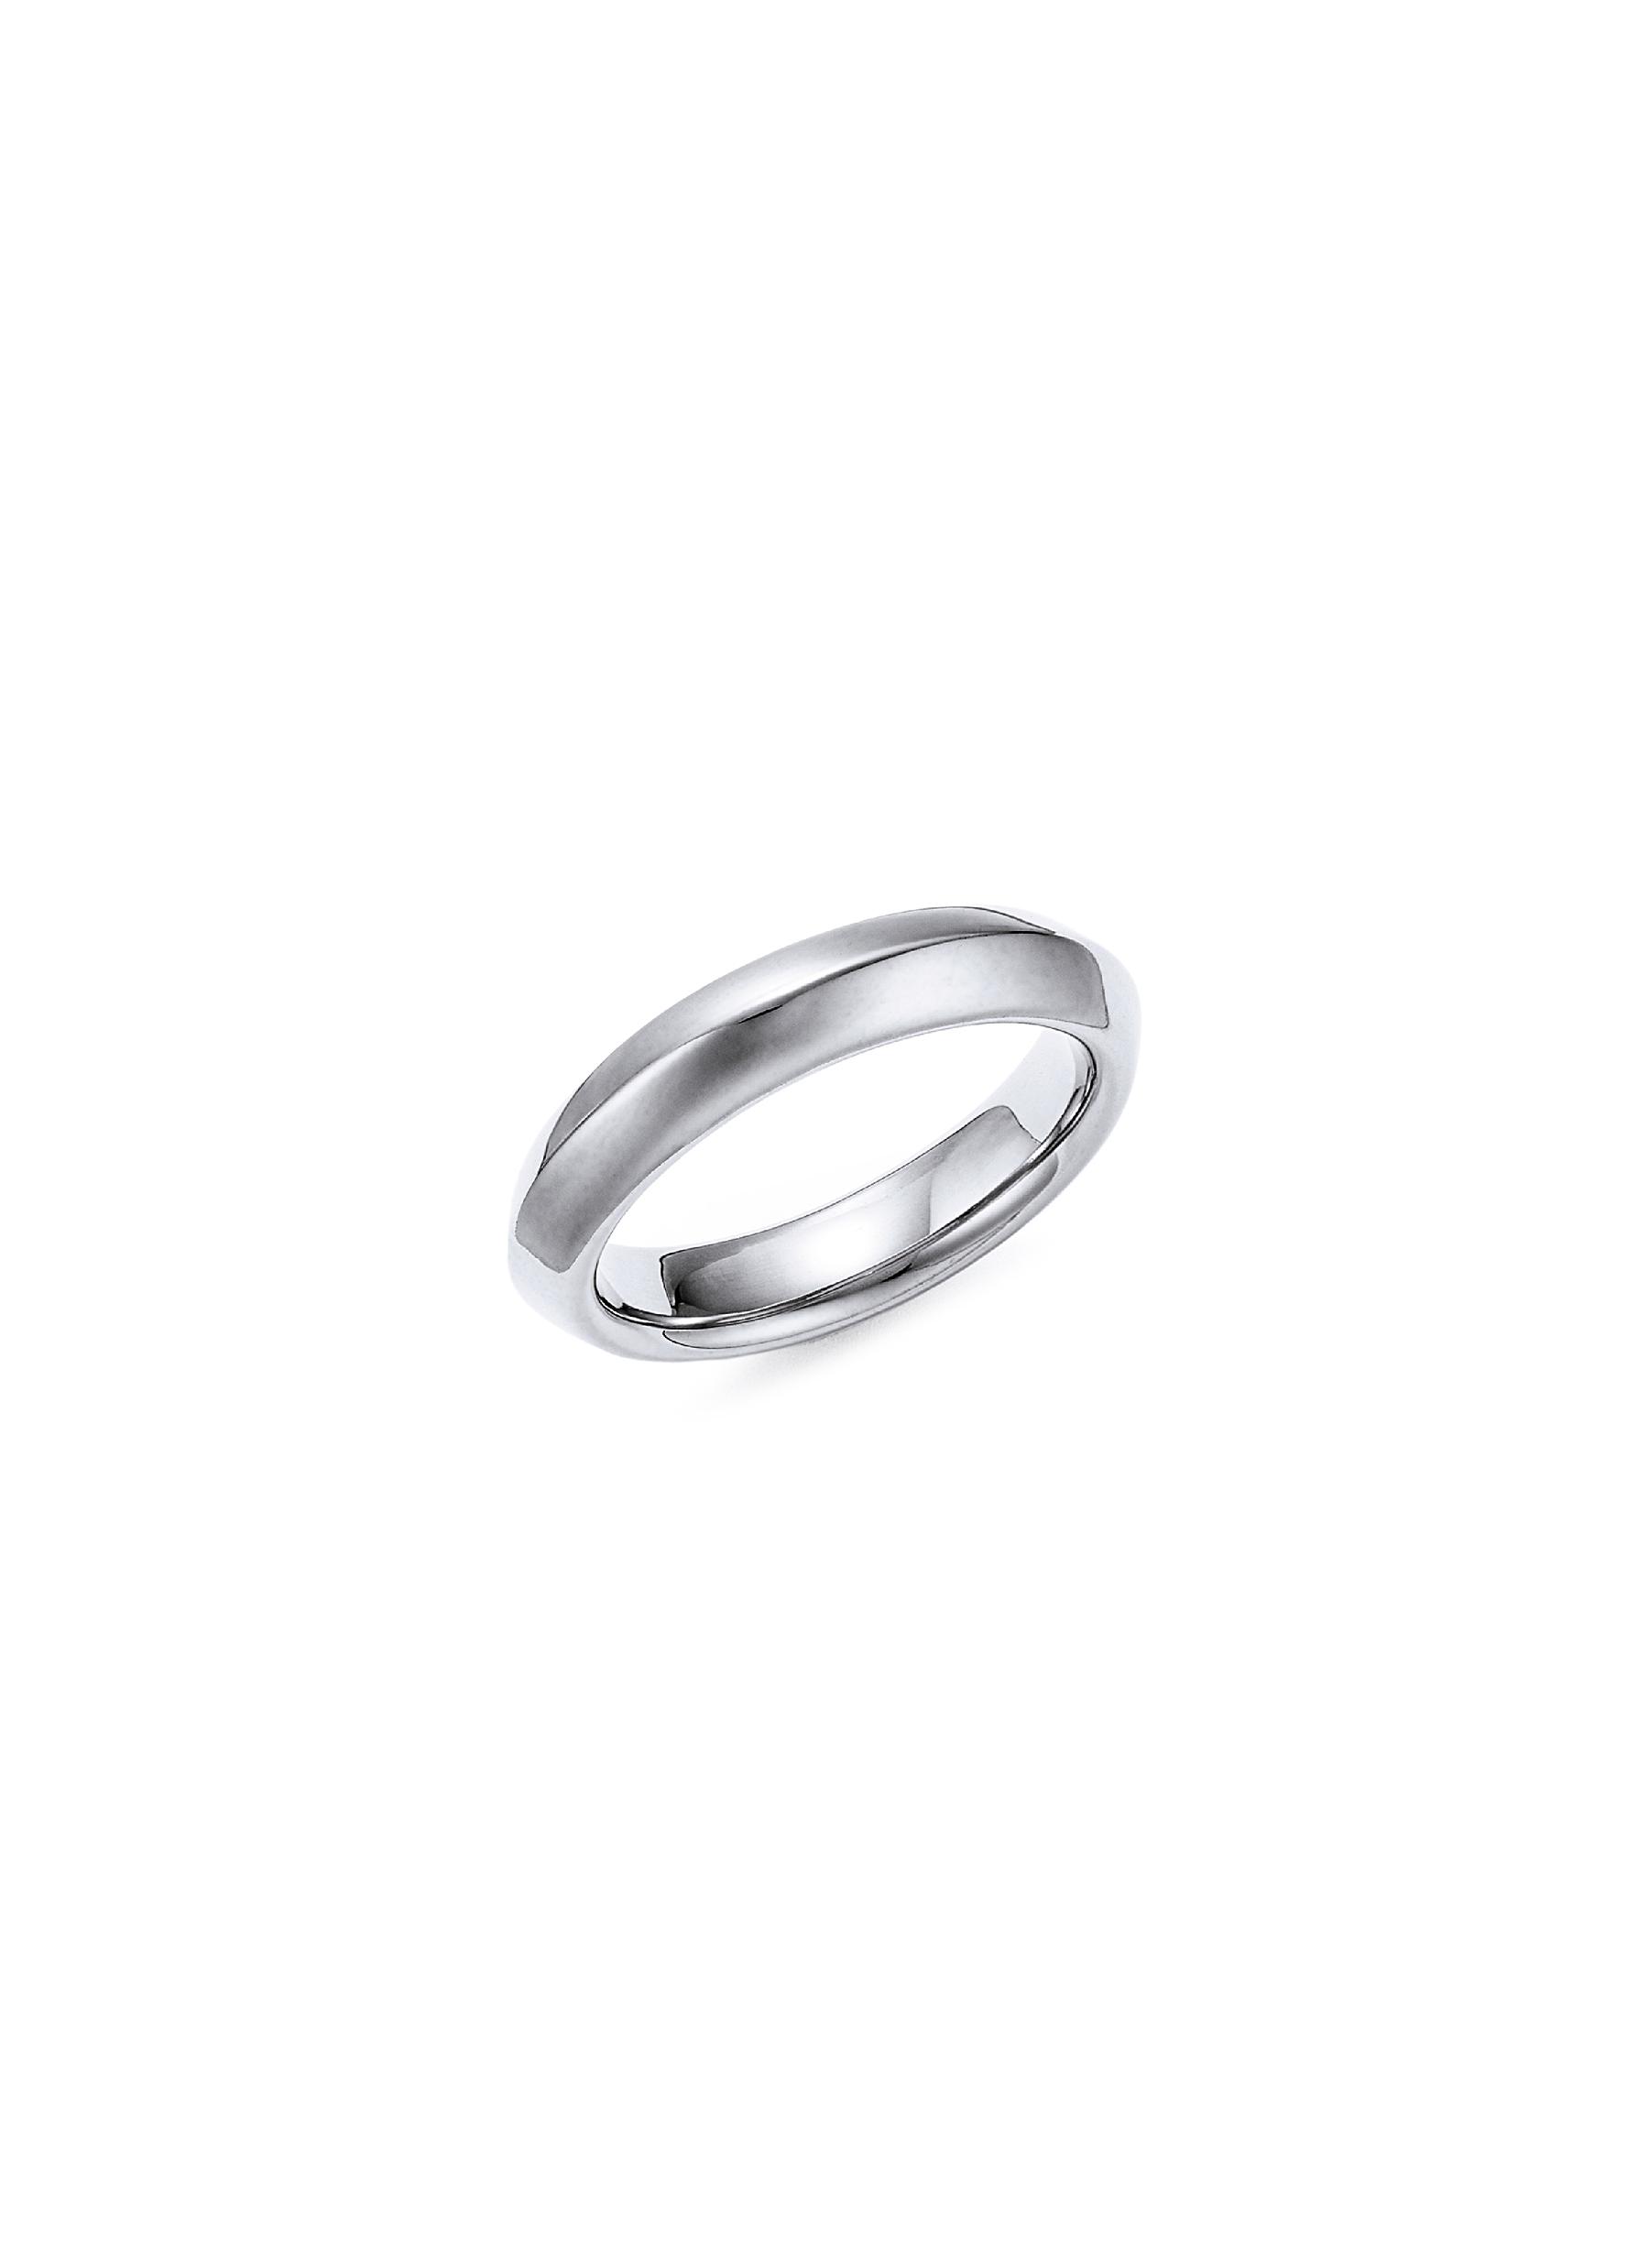 FUTURA ‘AMORE' 18K FAIRMINED ECOLOGICAL WHITE GOLD RING